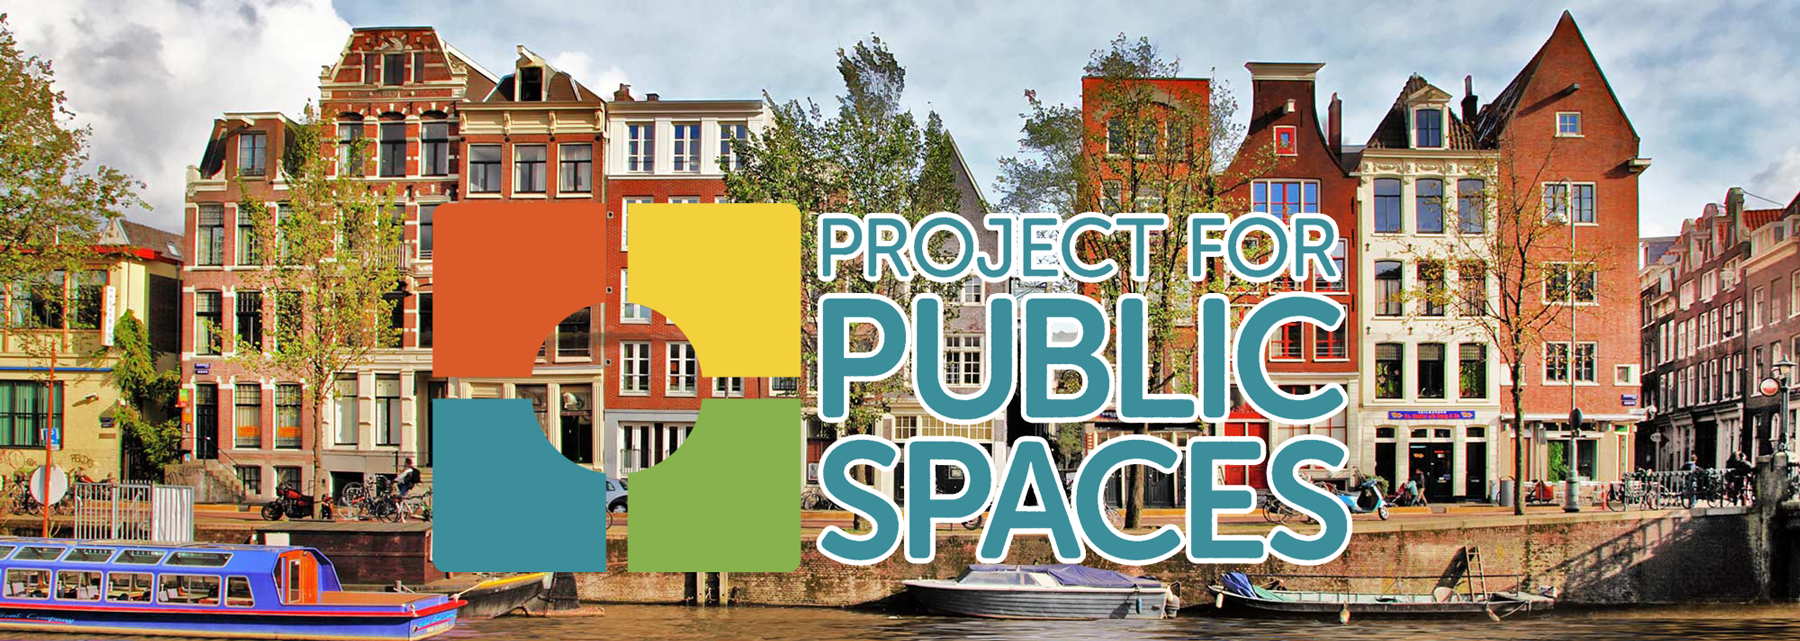 Project for Public Spaces is preparing a gathering in Amsterdam this October © Project for Public Spaces